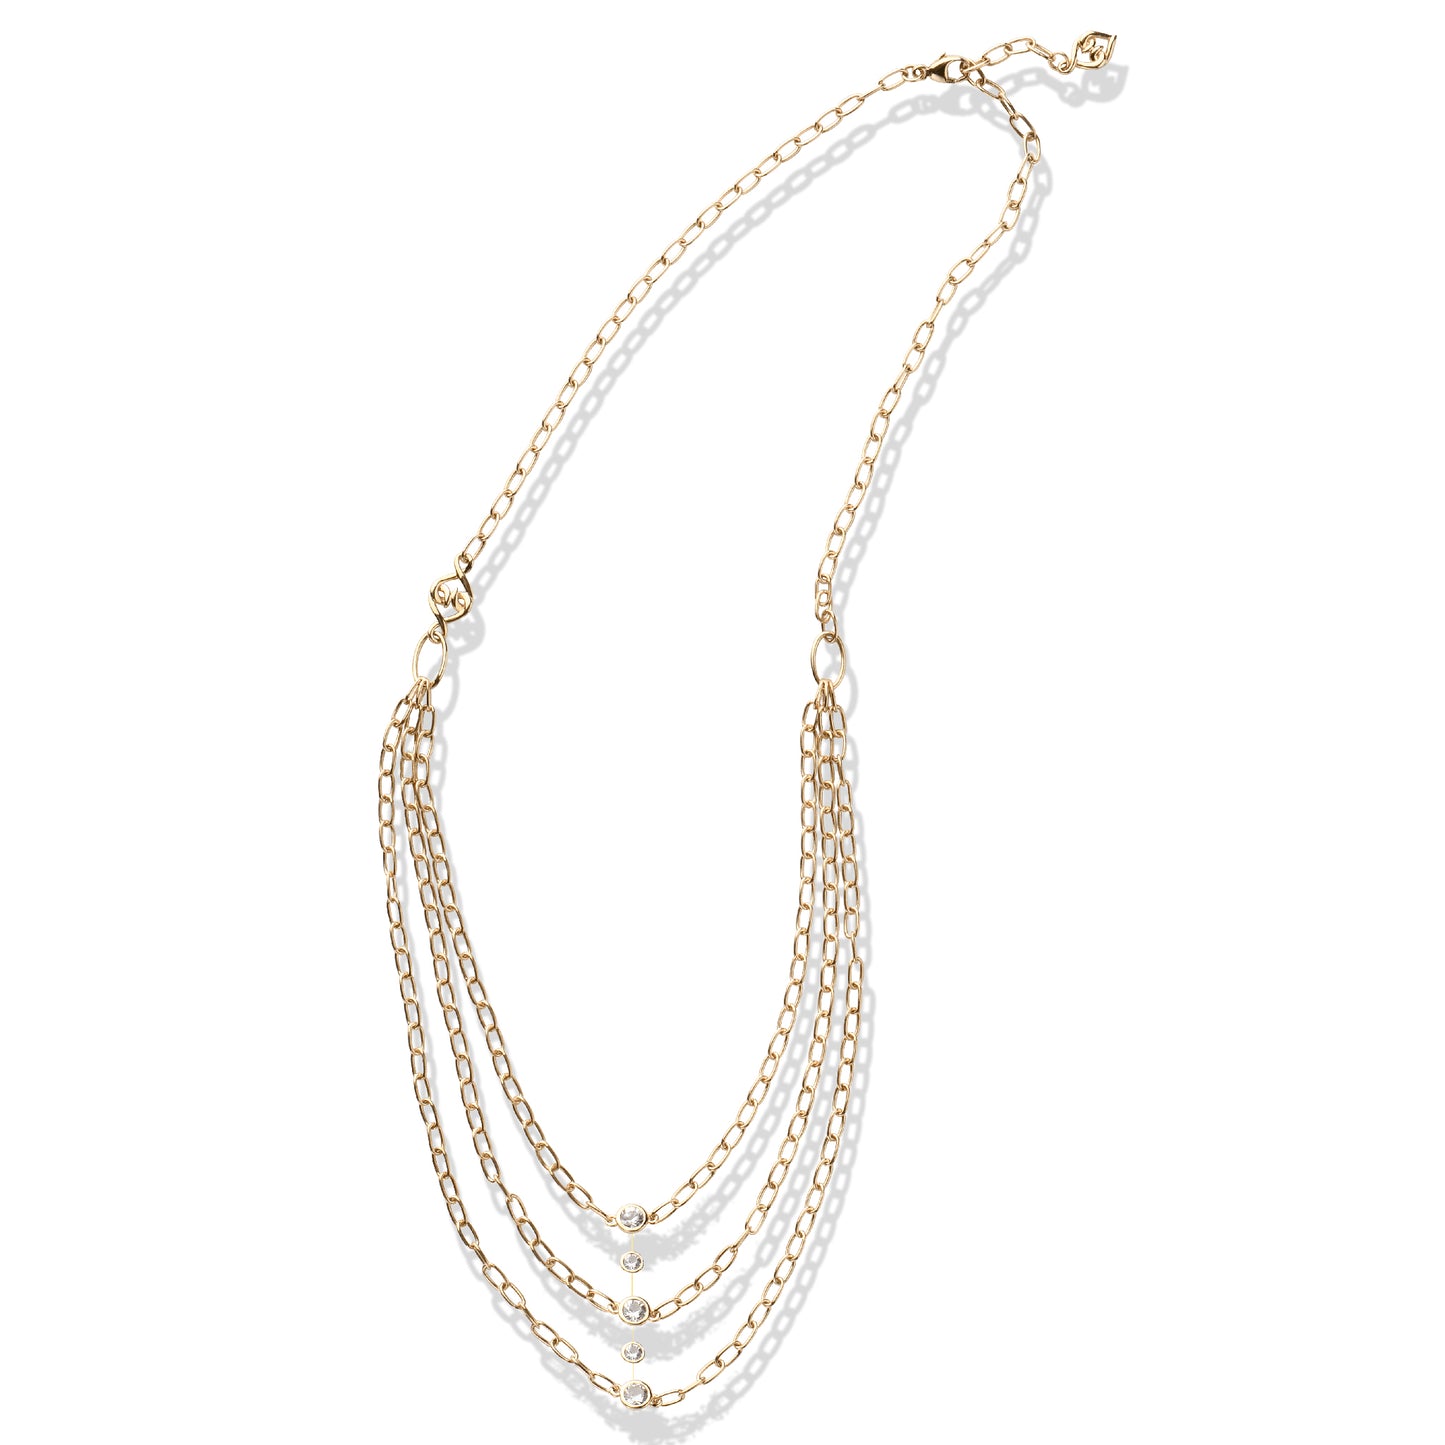 Gold Layered Necklace | White Sapphire Gold Bib Necklace